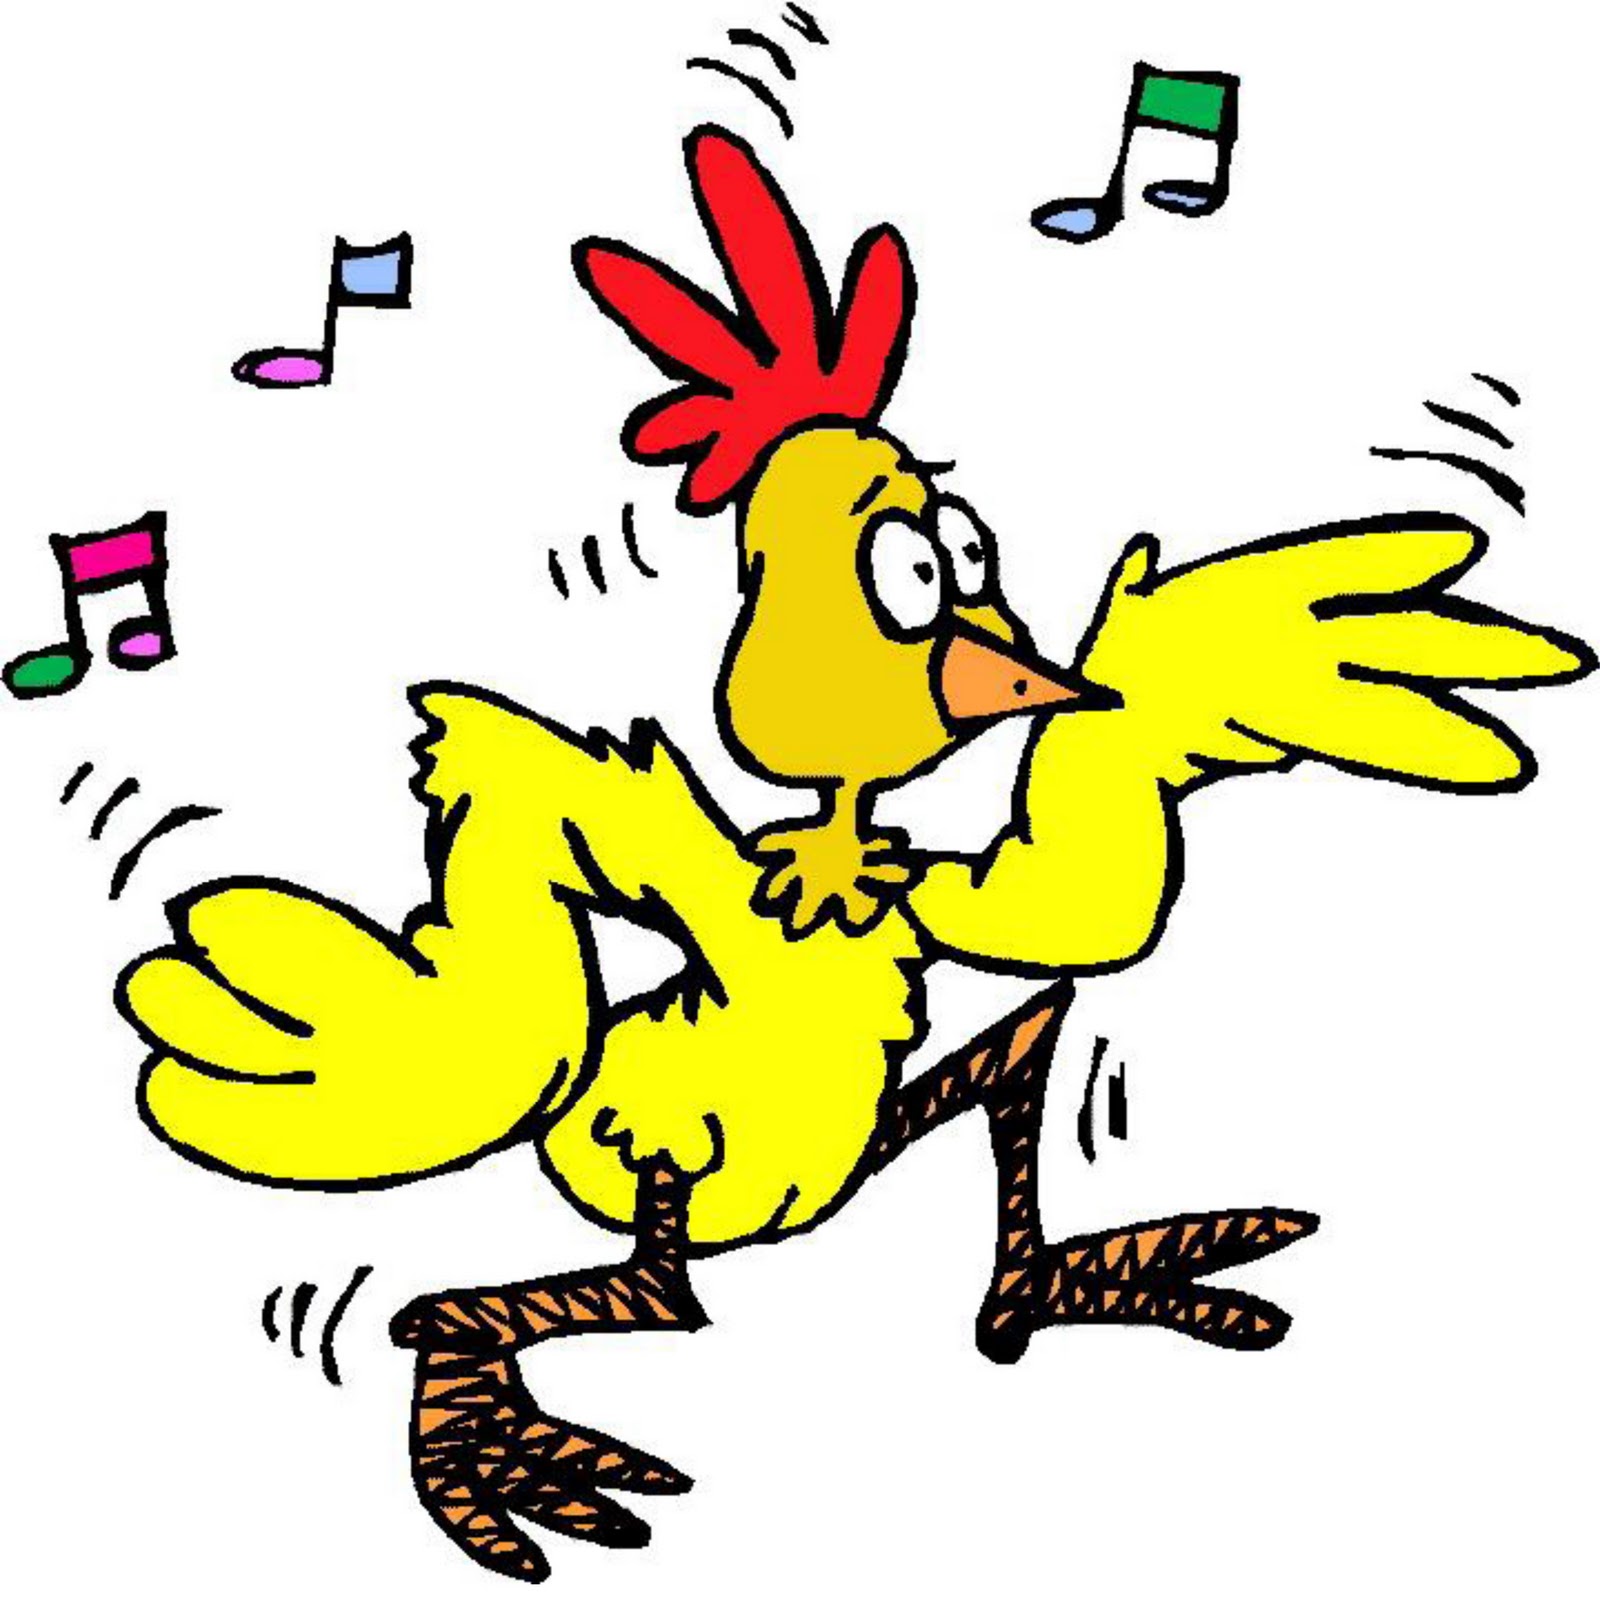 Funky Chicken Dancing Animated Gif - ClipArt Best - ClipArt Best